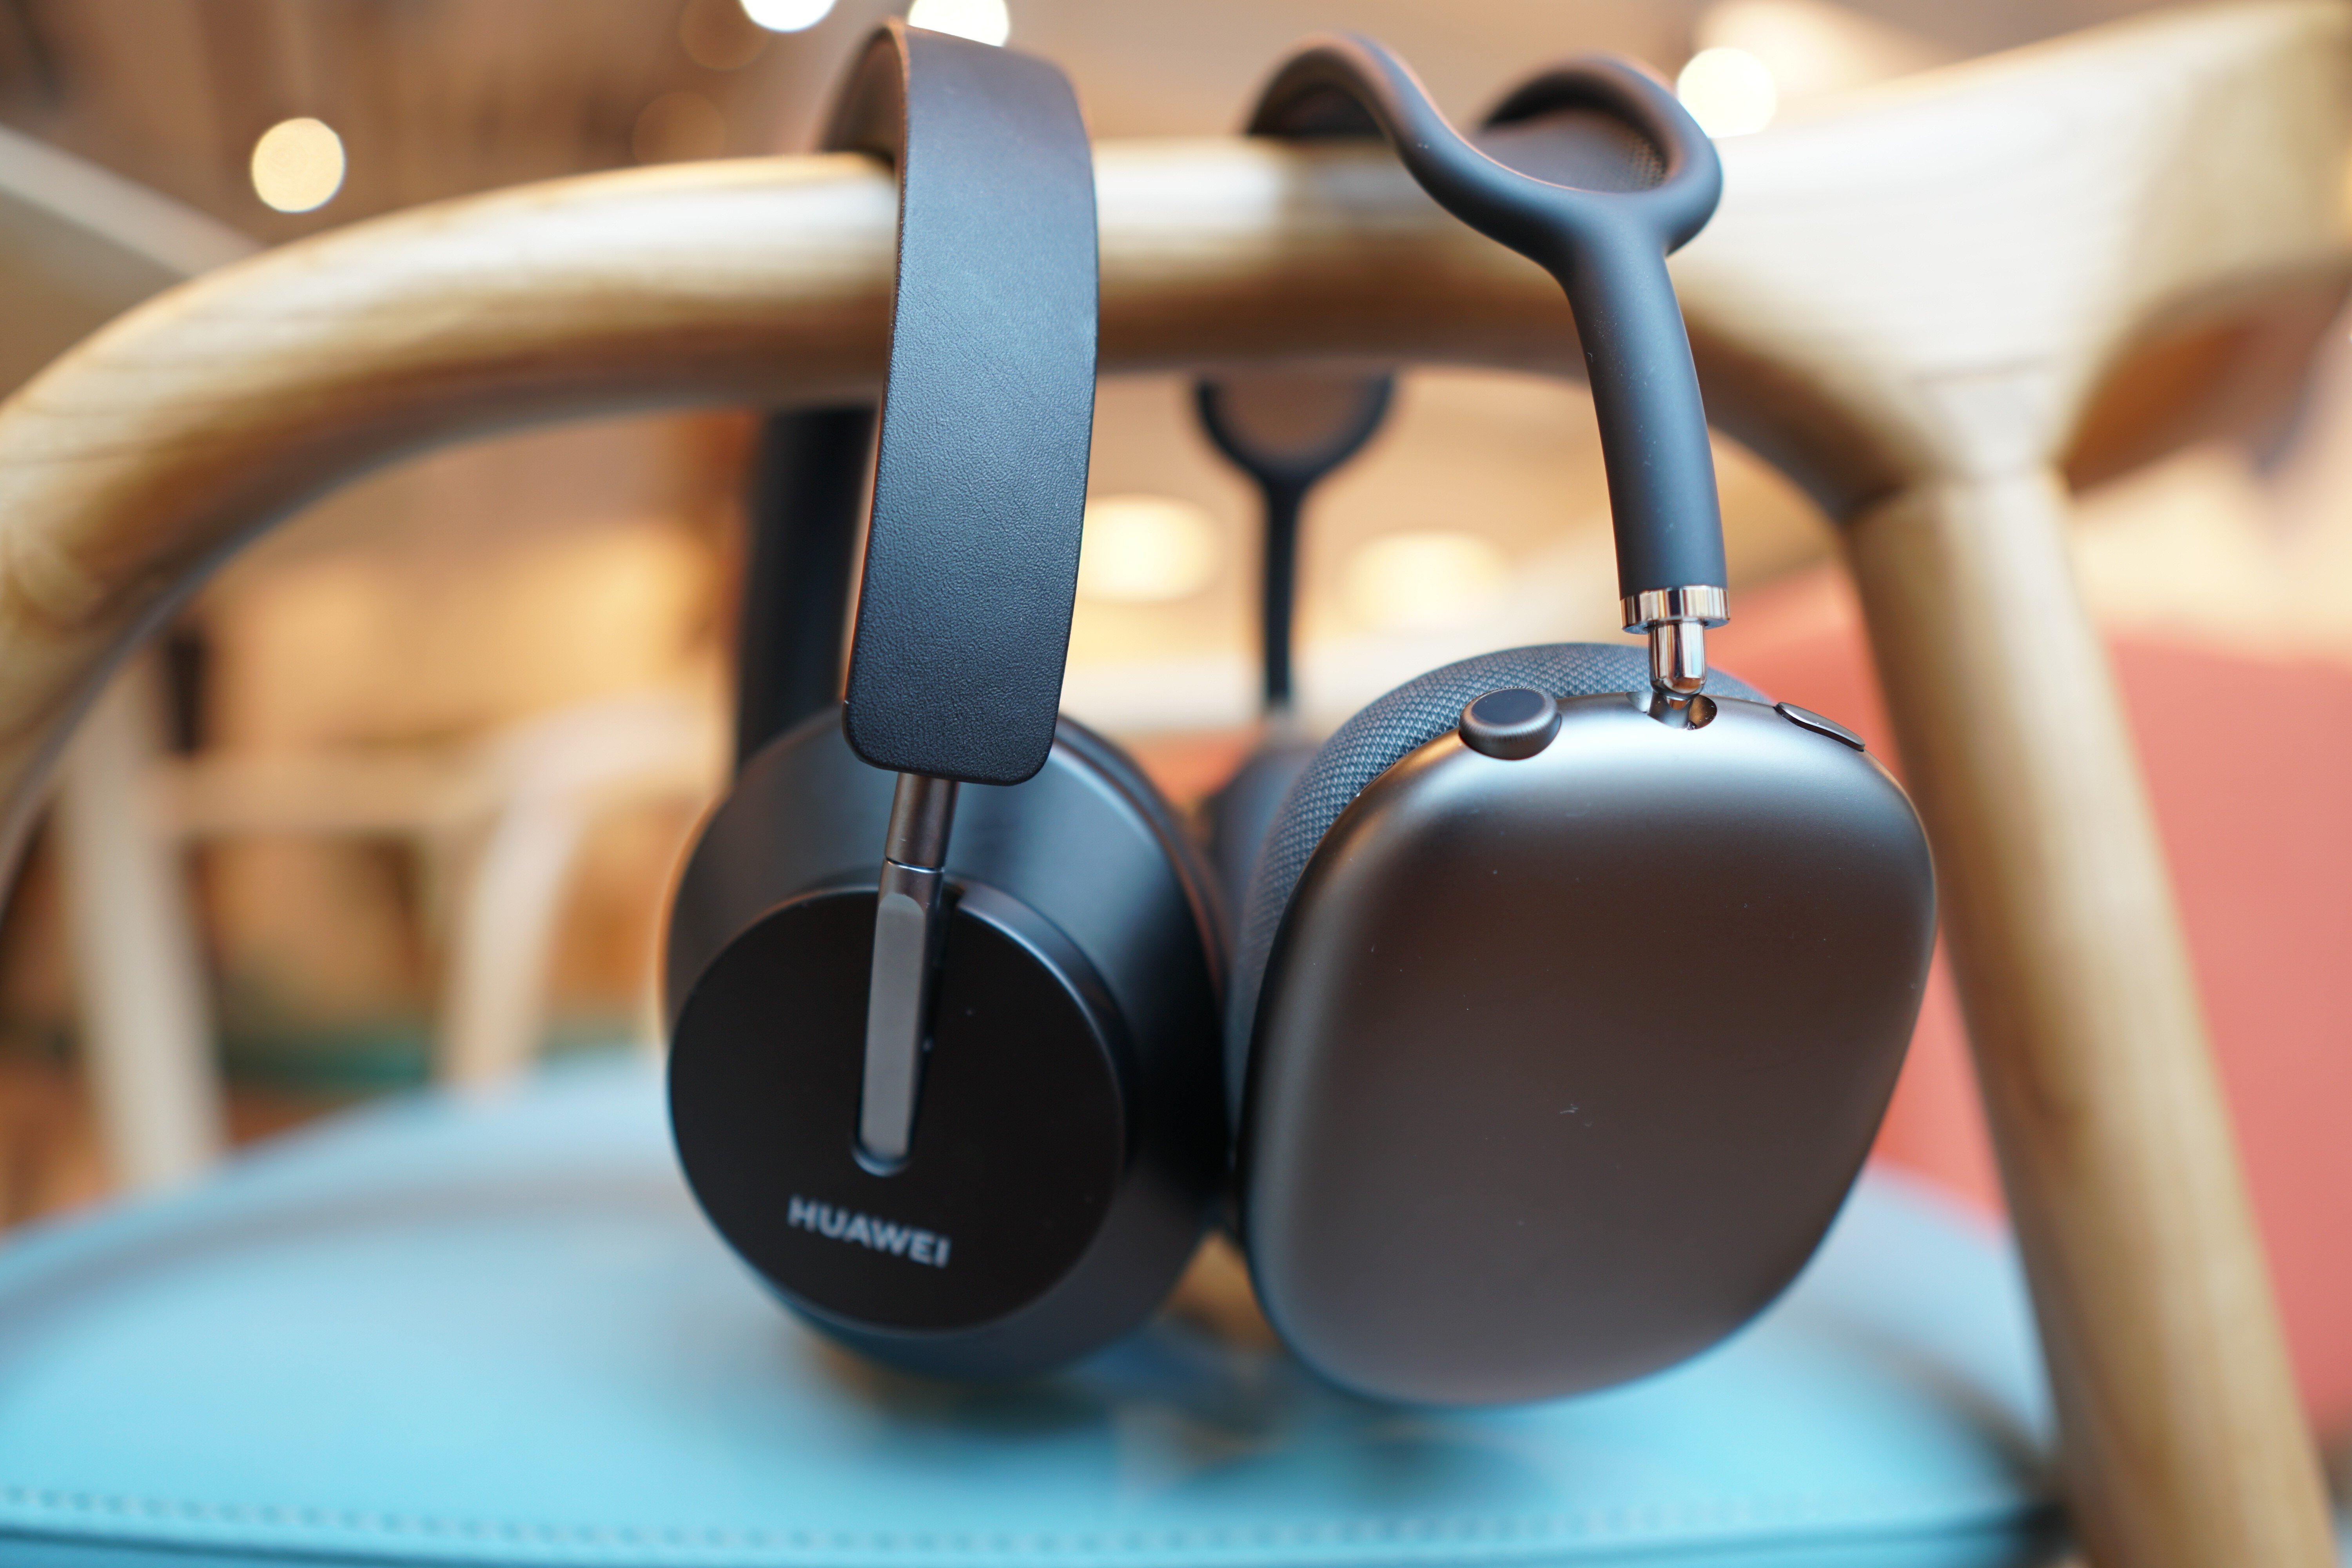 Apple AirPods Max vs Huawei FreeBuds Studio: which headphones are best? | South China Morning